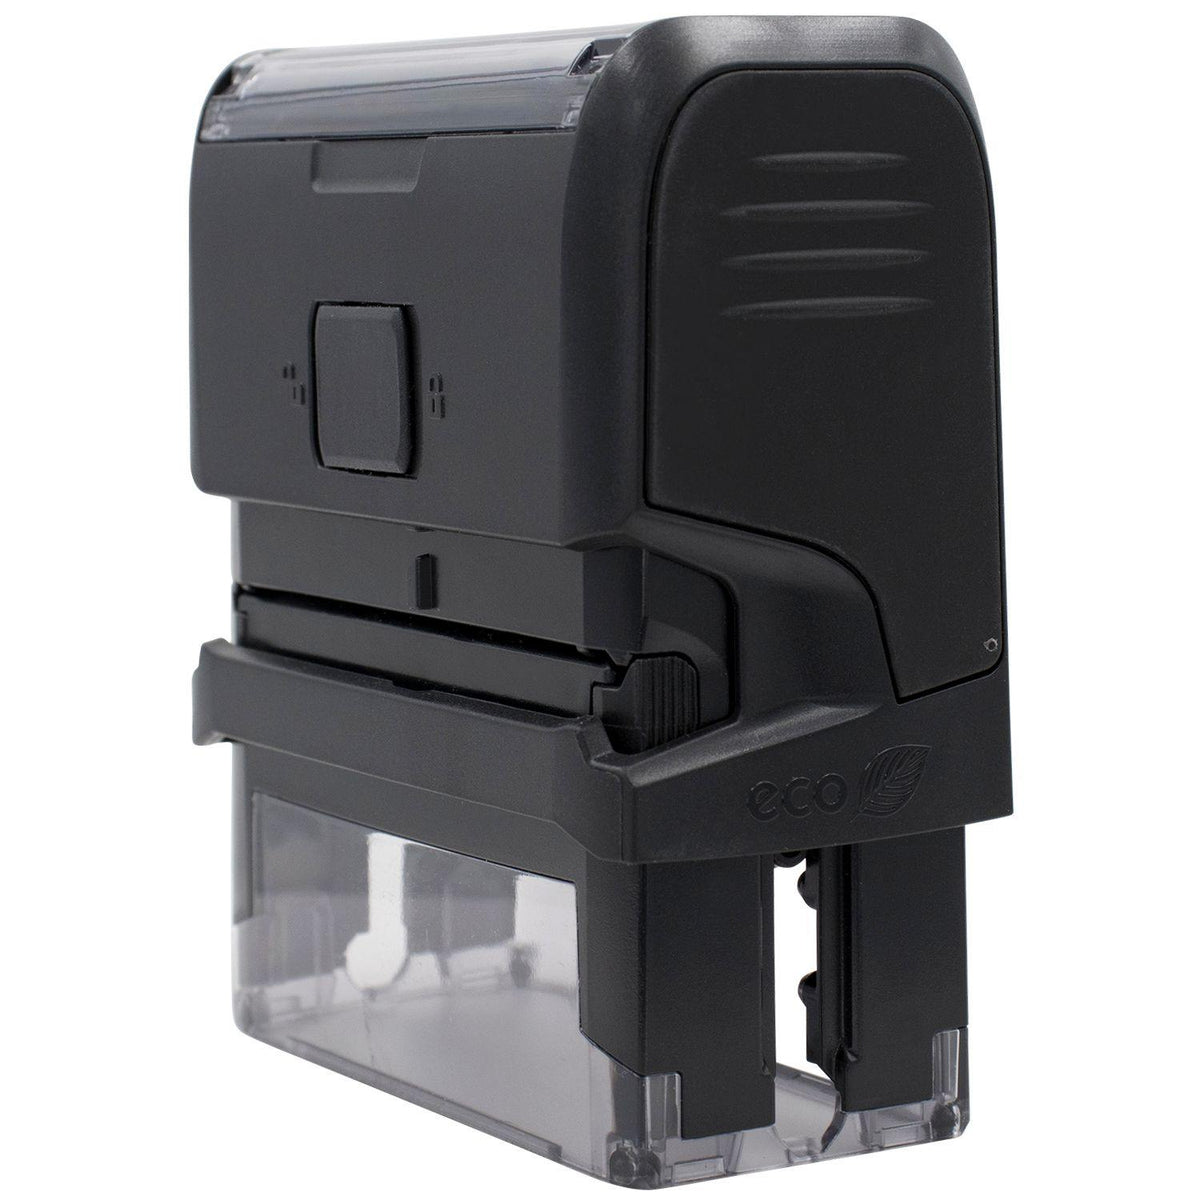 Self Inking Unofficial Transcript Stamp - Engineer Seal Stamps - Brand_Trodat, Impression Size_Small, Stamp Type_Self-Inking Stamp, Type of Use_Teacher